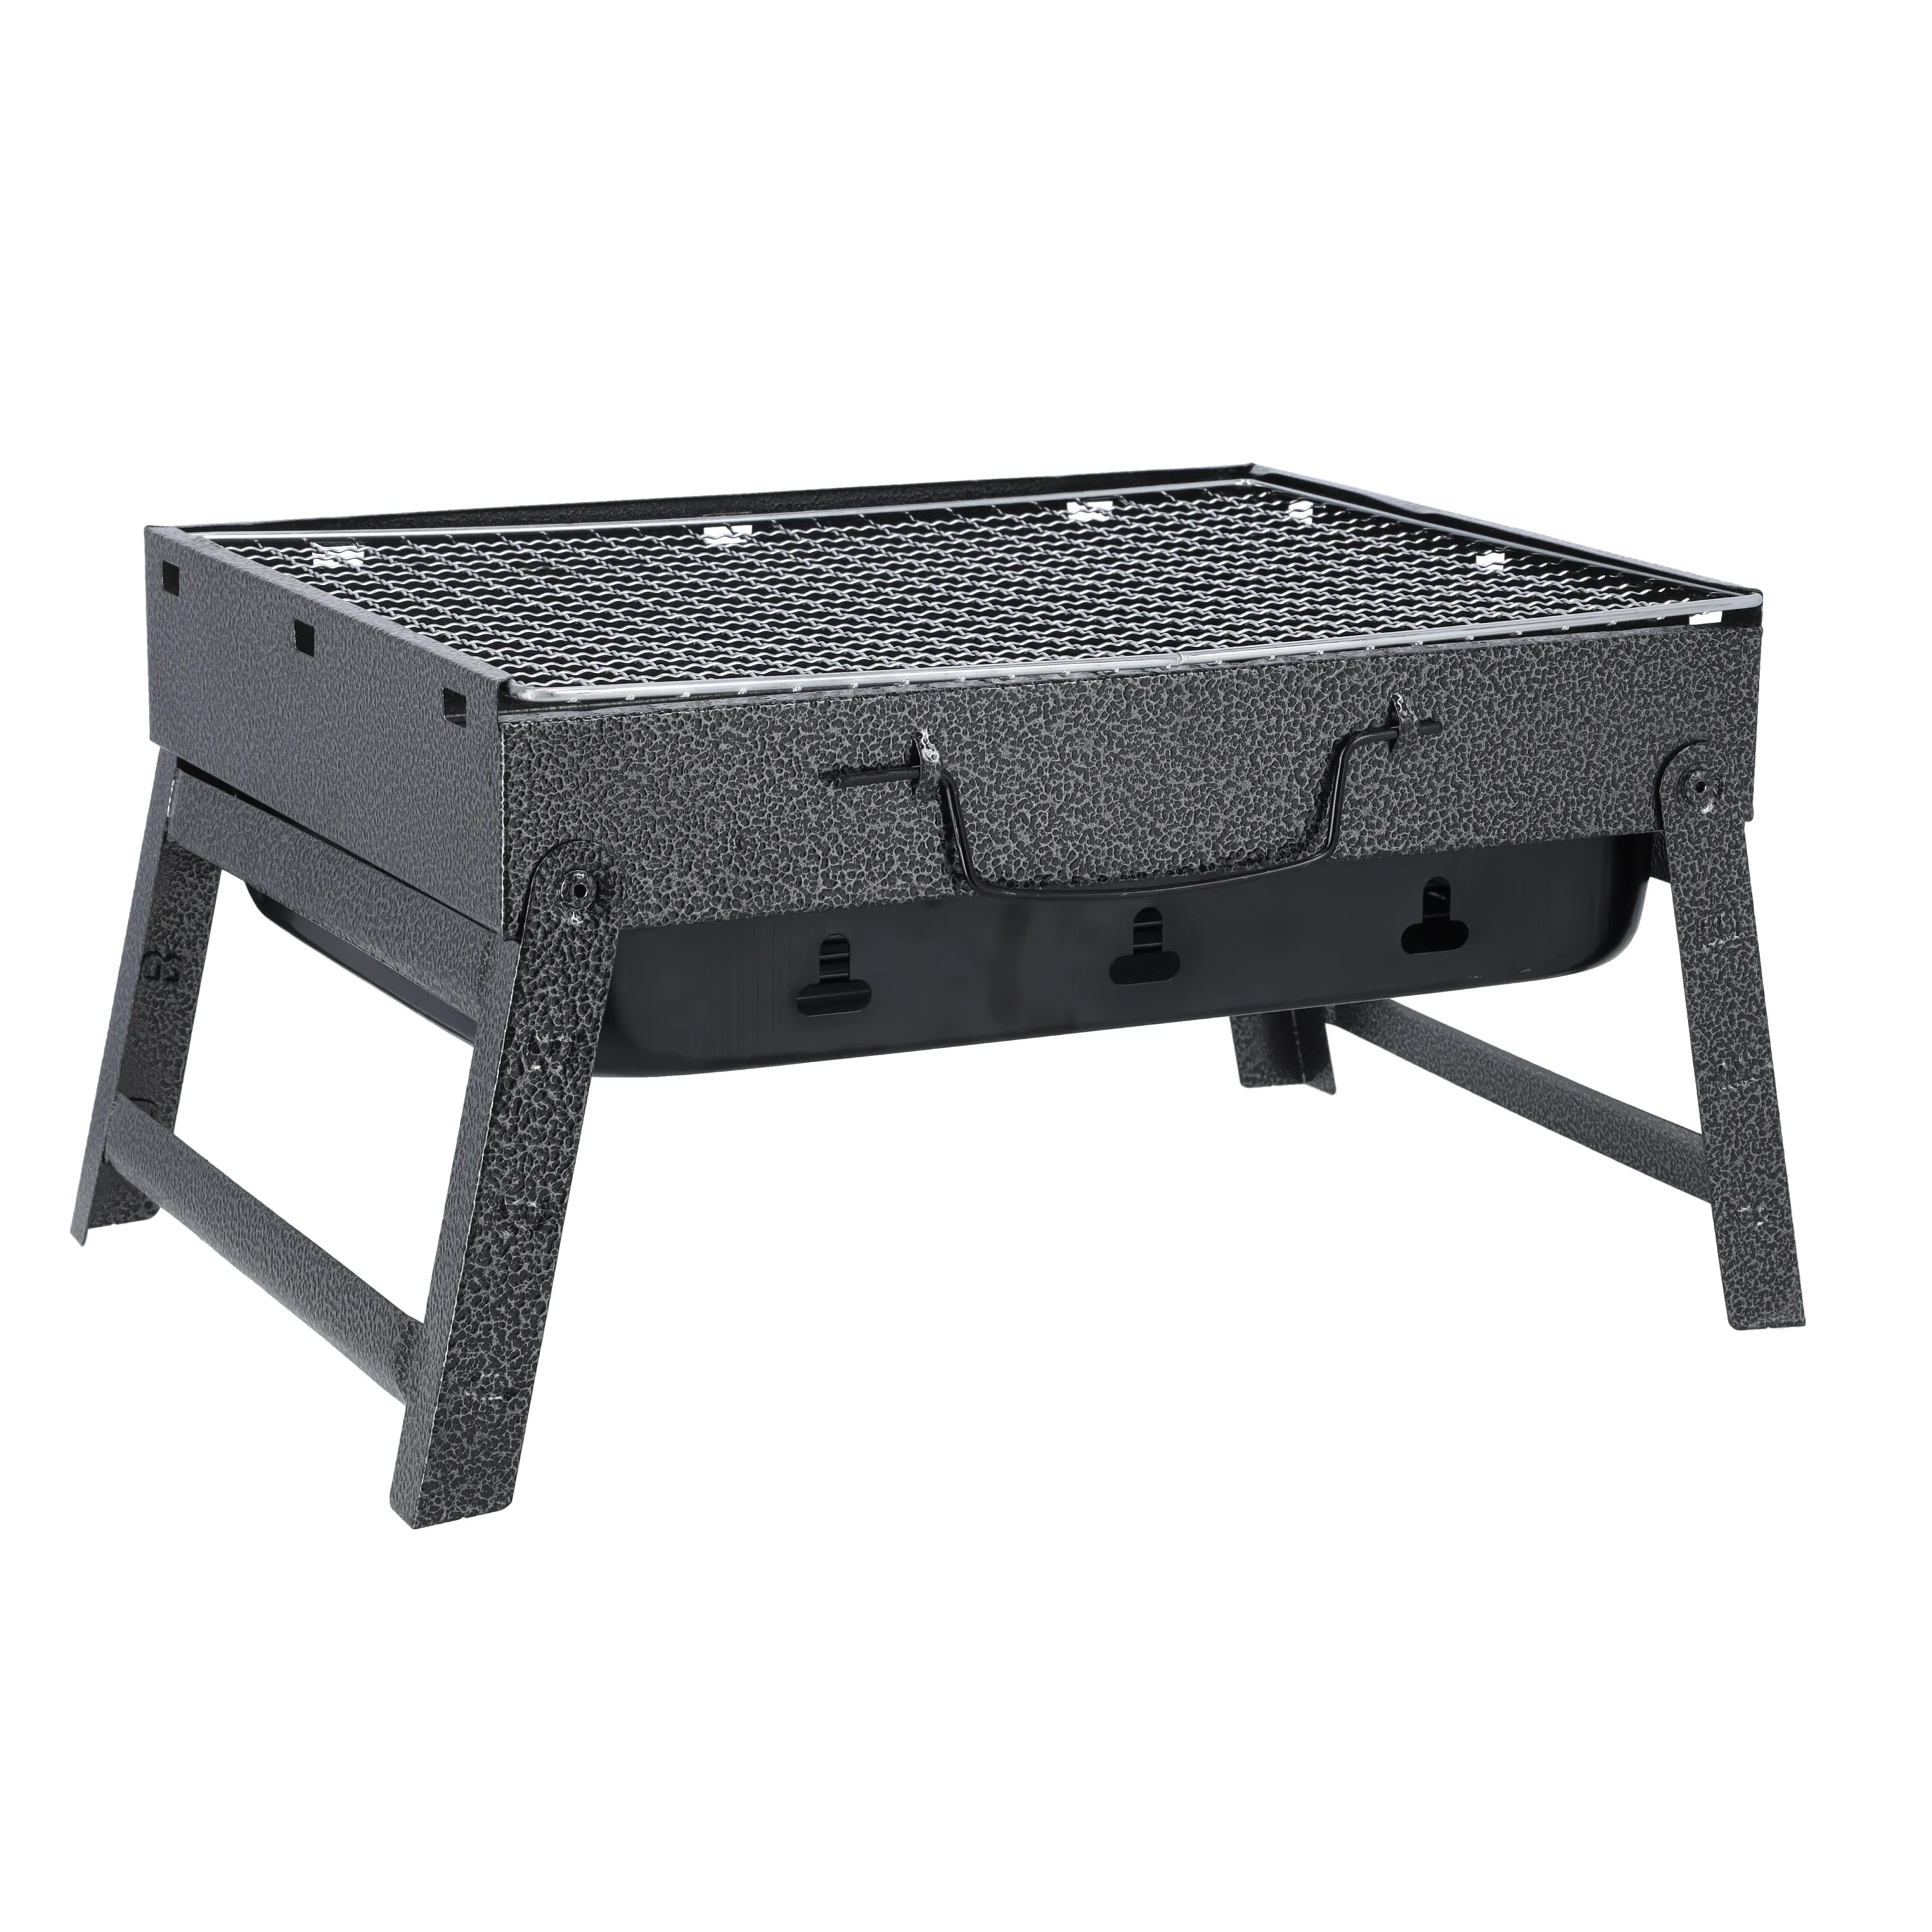 Royalford Barbecue Stand with Grill, RF10357 - Foldable Barbecue Charcoal Grill, Folding Tabletop Kabab Smoker Grill for Outdoor Camping, Durable Iron